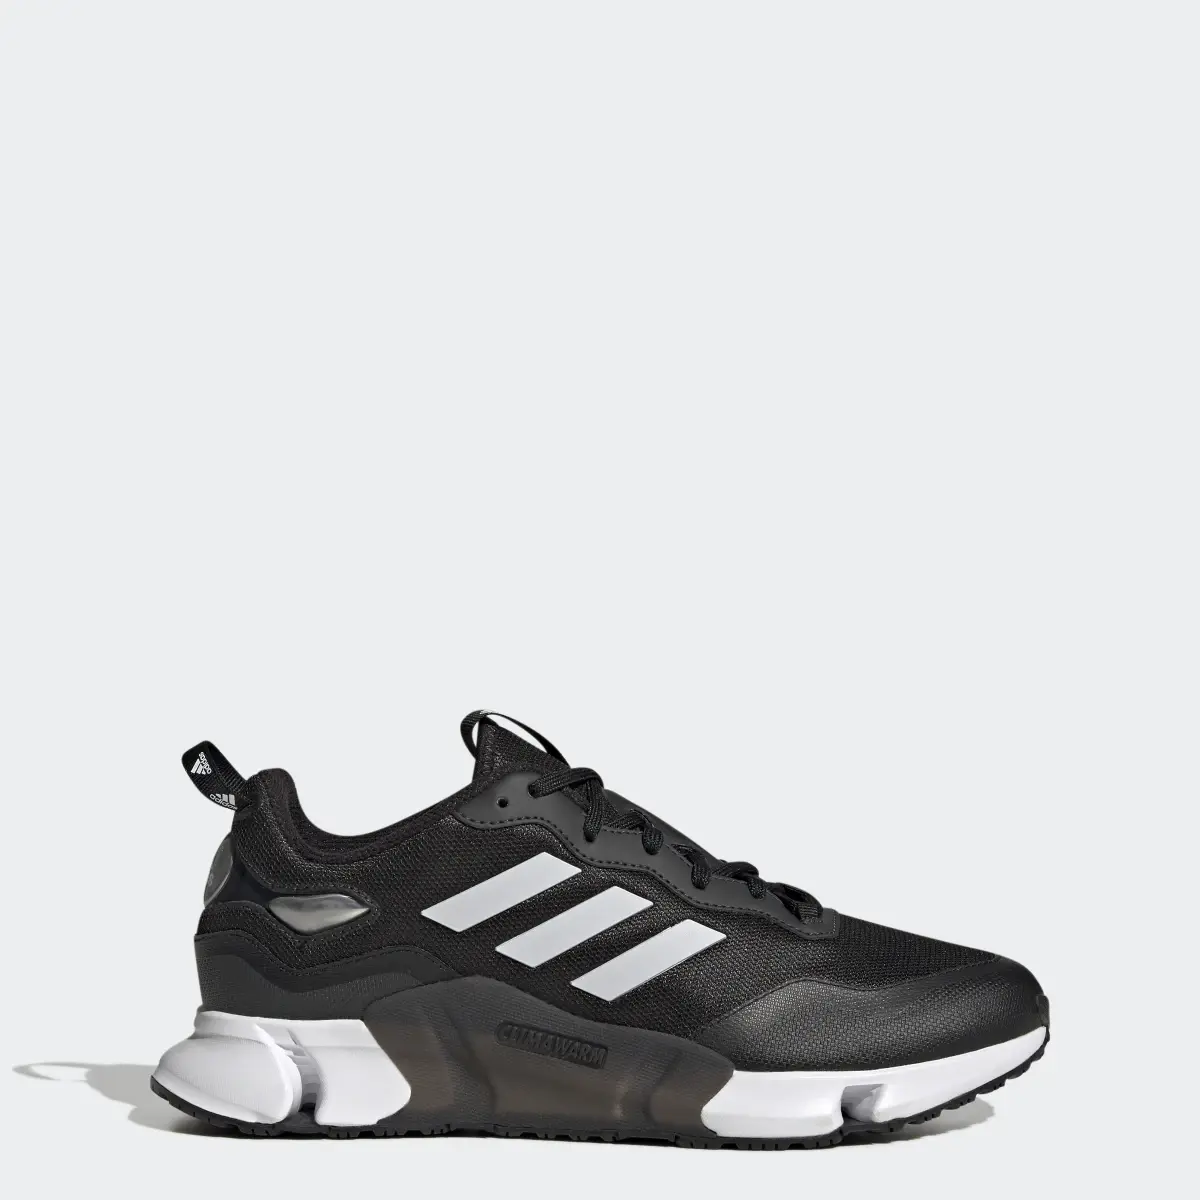 Adidas Chaussure Climawarm. 1